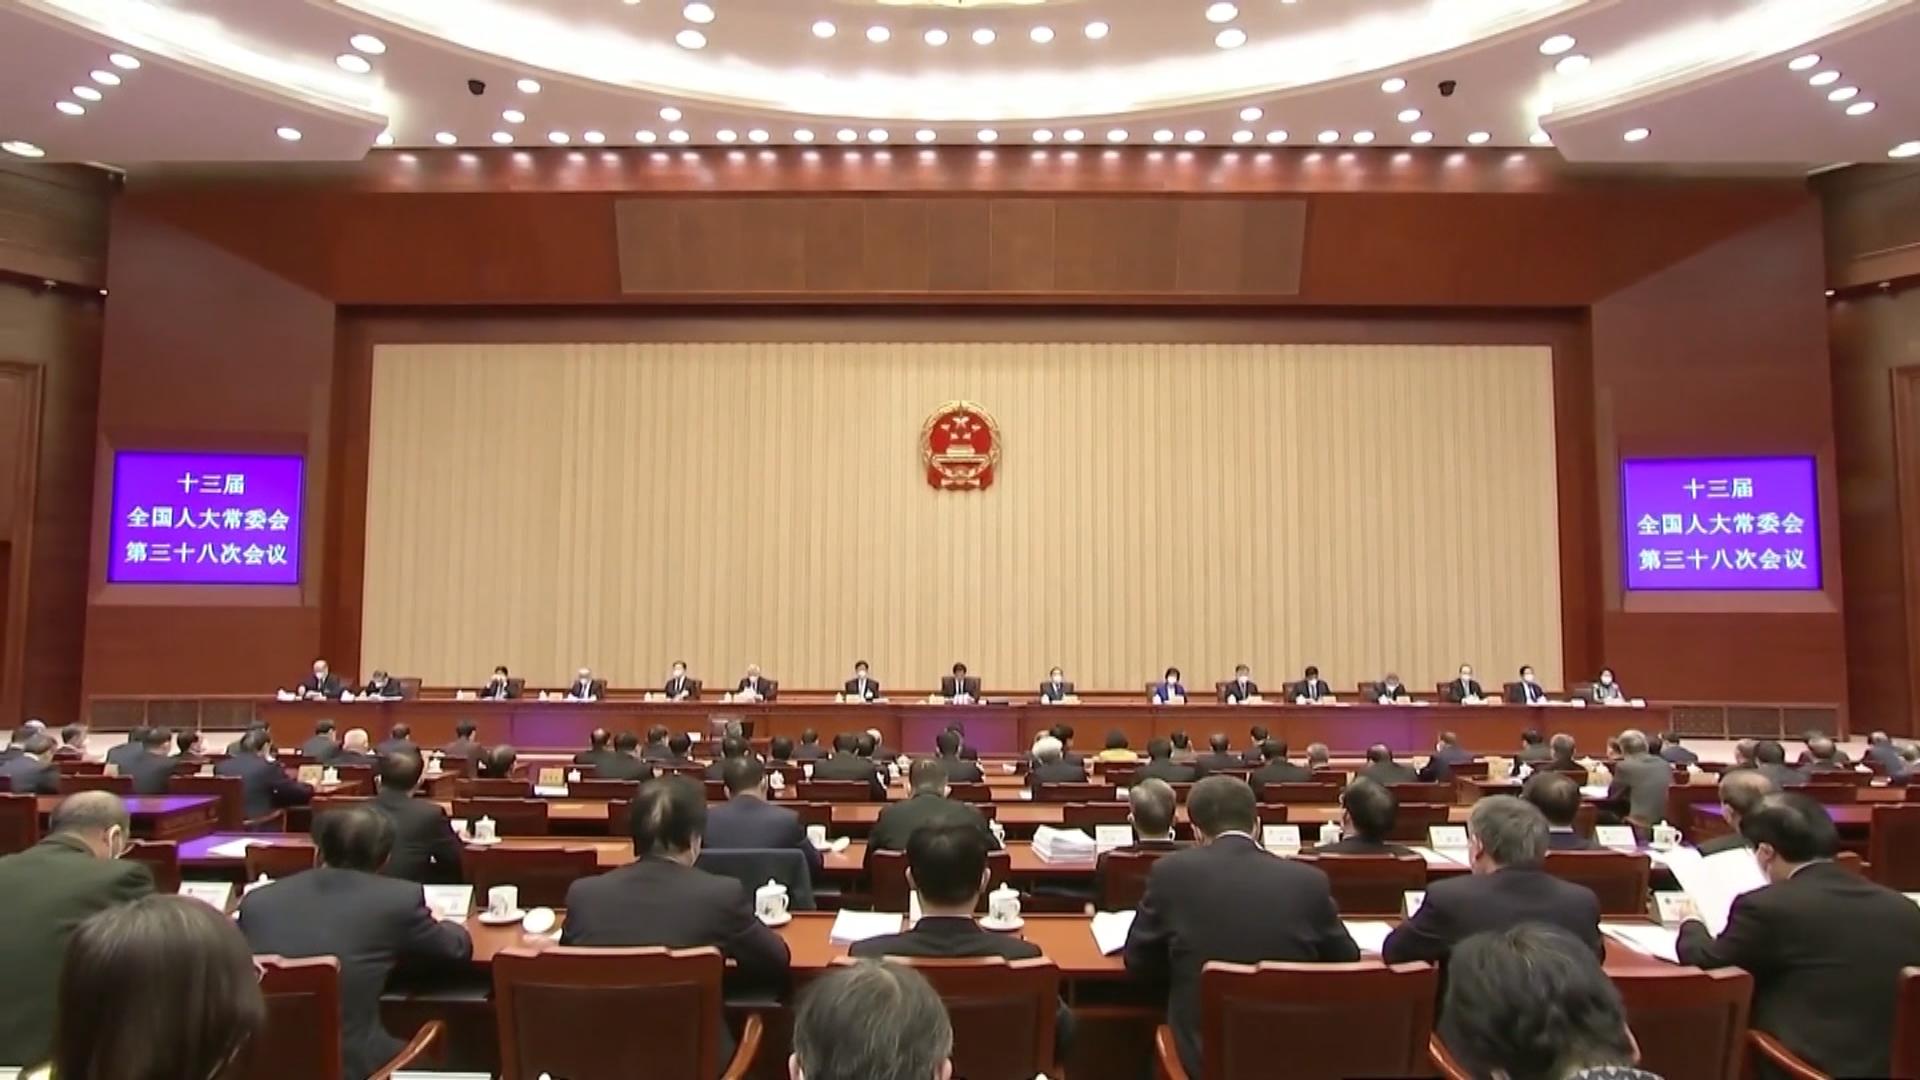 The Standing Committee of the National People's Congress of China meets at the Great Hall of the People in Beijing (Screen capture from China Central Television 30/12/2022)